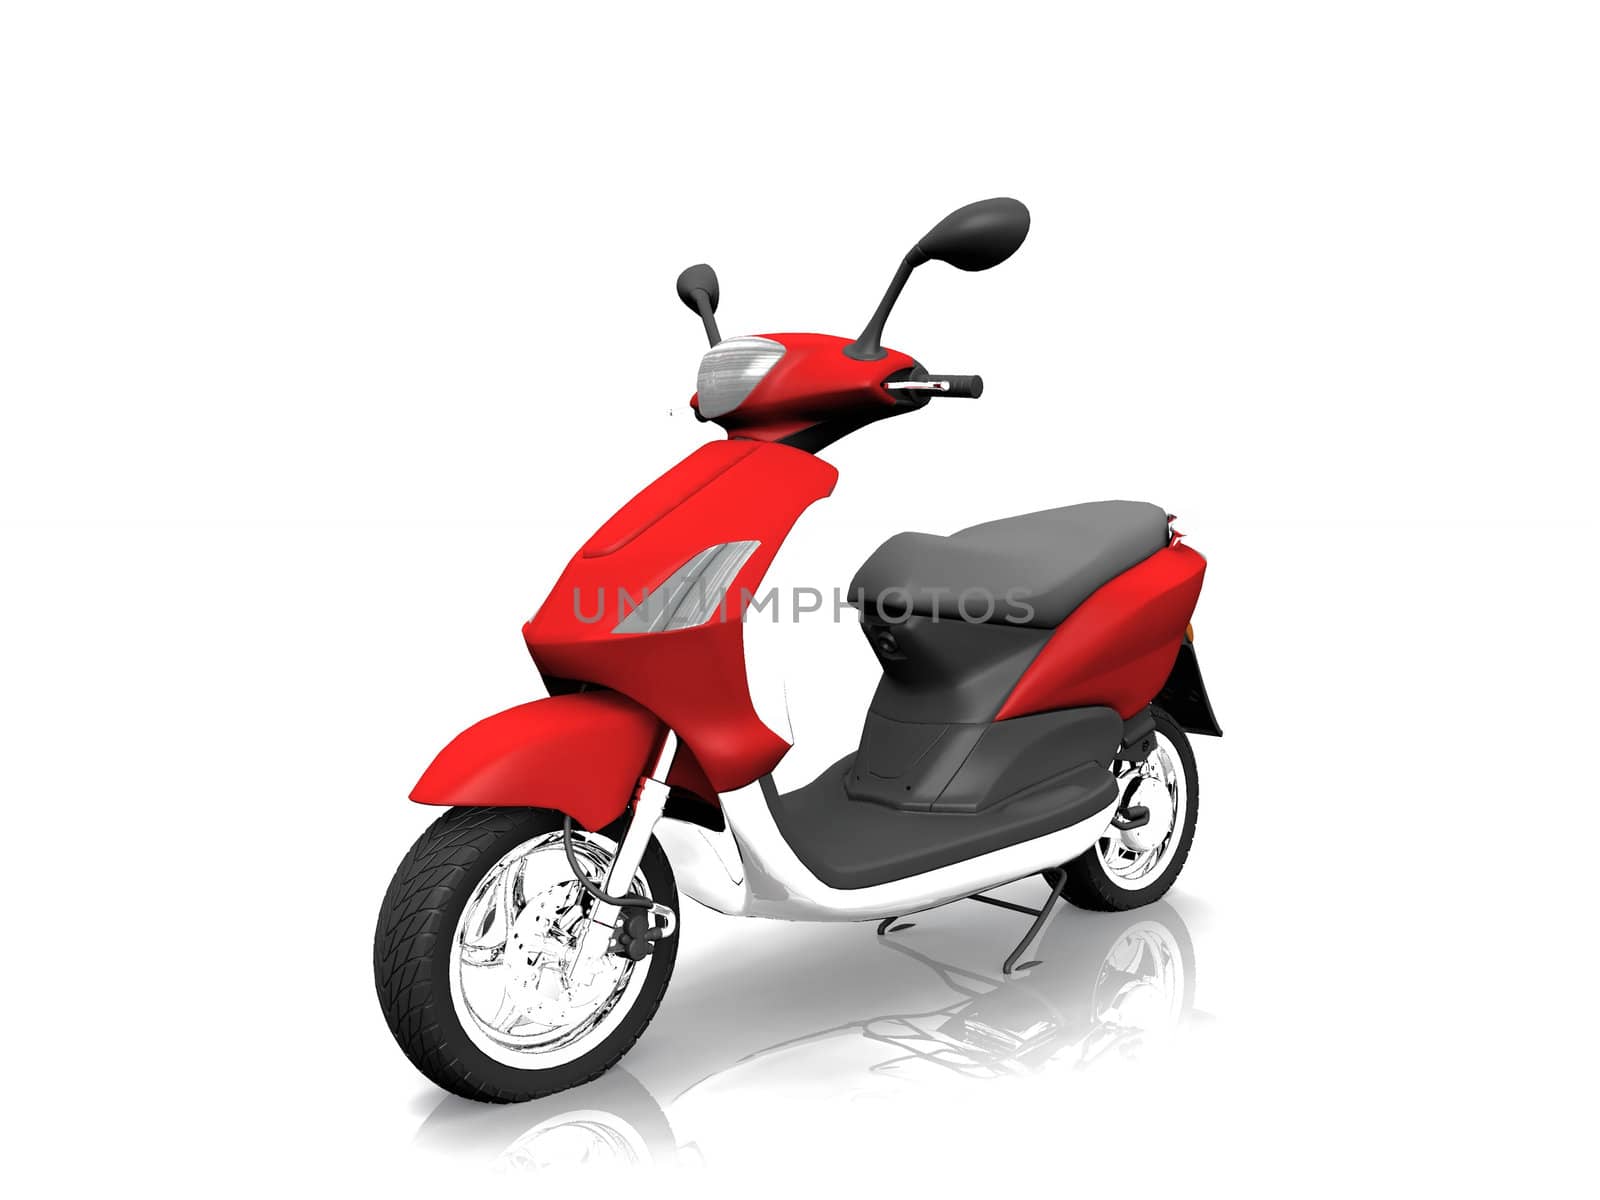 the motorcycle on a white background